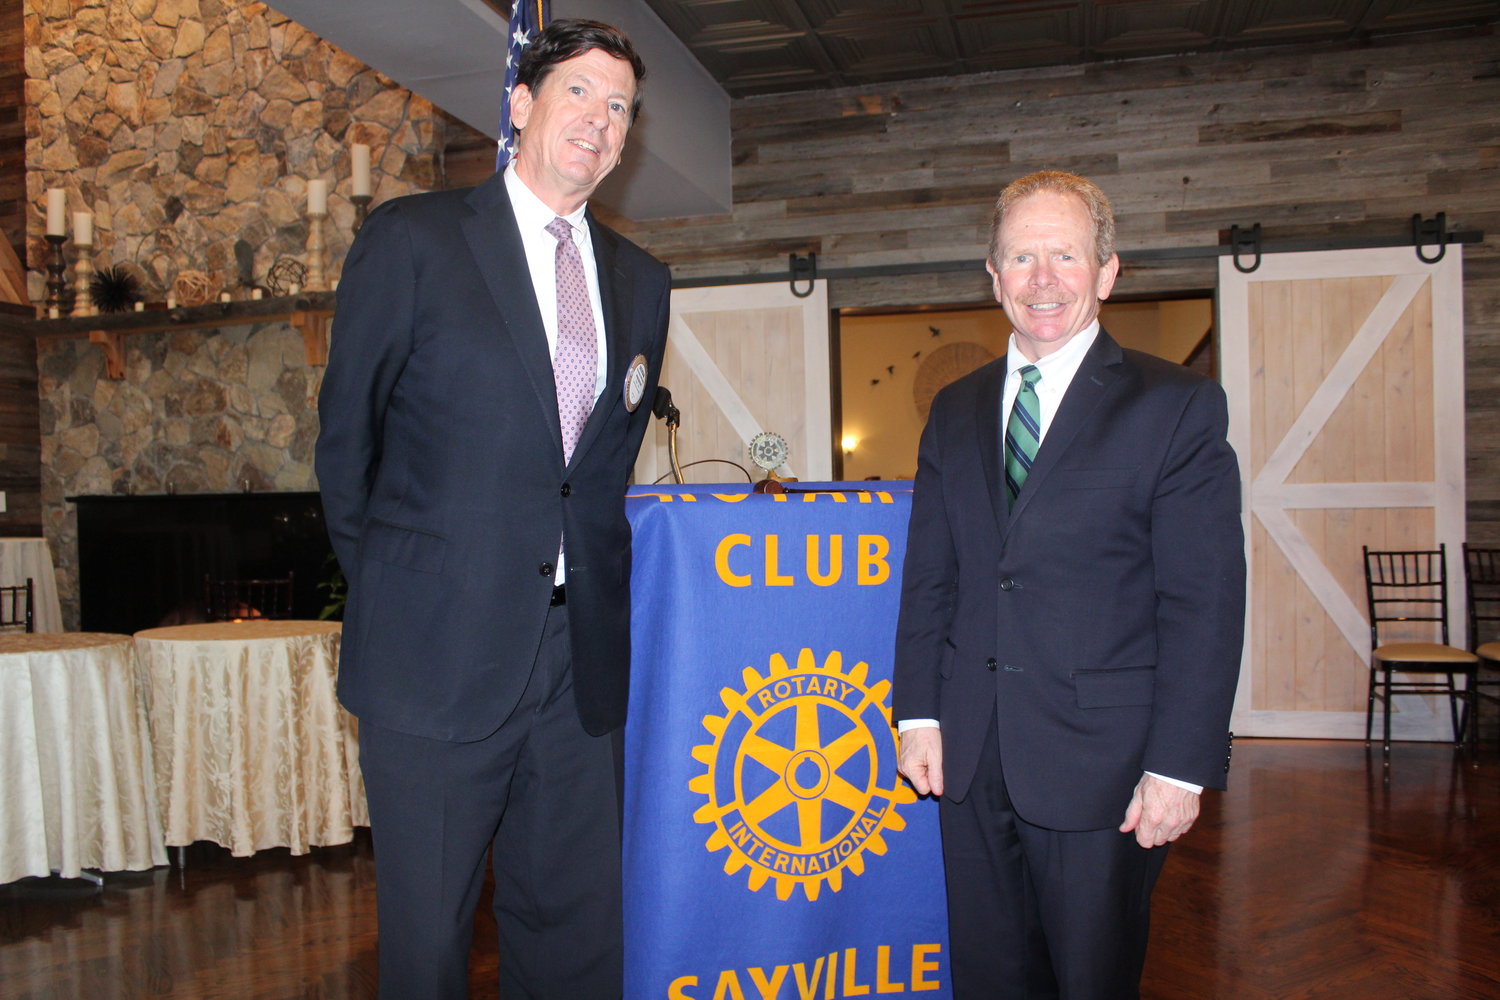 Sayville Rotary president Brendan McCurdy introduced deputy county executive Peter Scully recently, who discussed the county’s mission on residential wastewater treatment systems. 
SCN/Leuzzi 
Sayville Rotary president Brendan McCurdy introduced deputy county executive Peter Scully recently, who discussed the county’s mission on residential wastewater treatment systems.